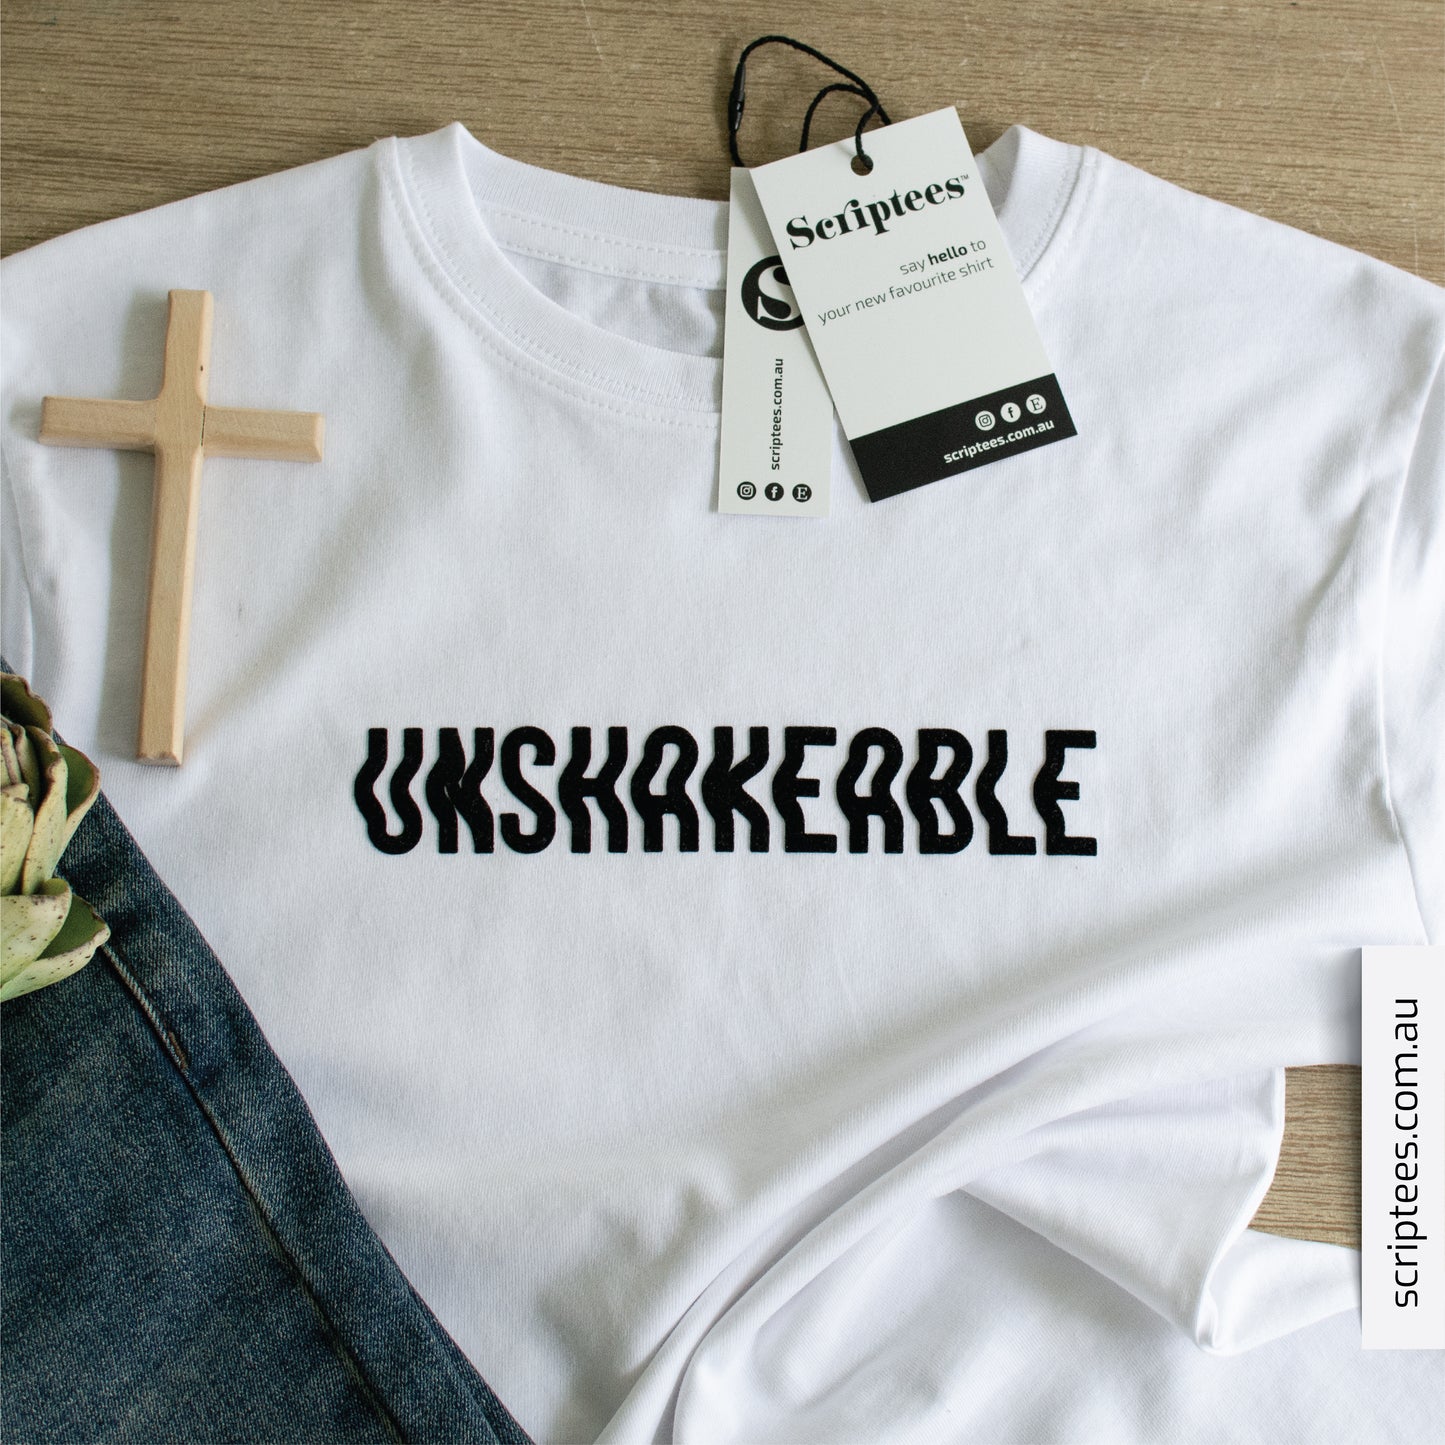 Unshakeable for Kids